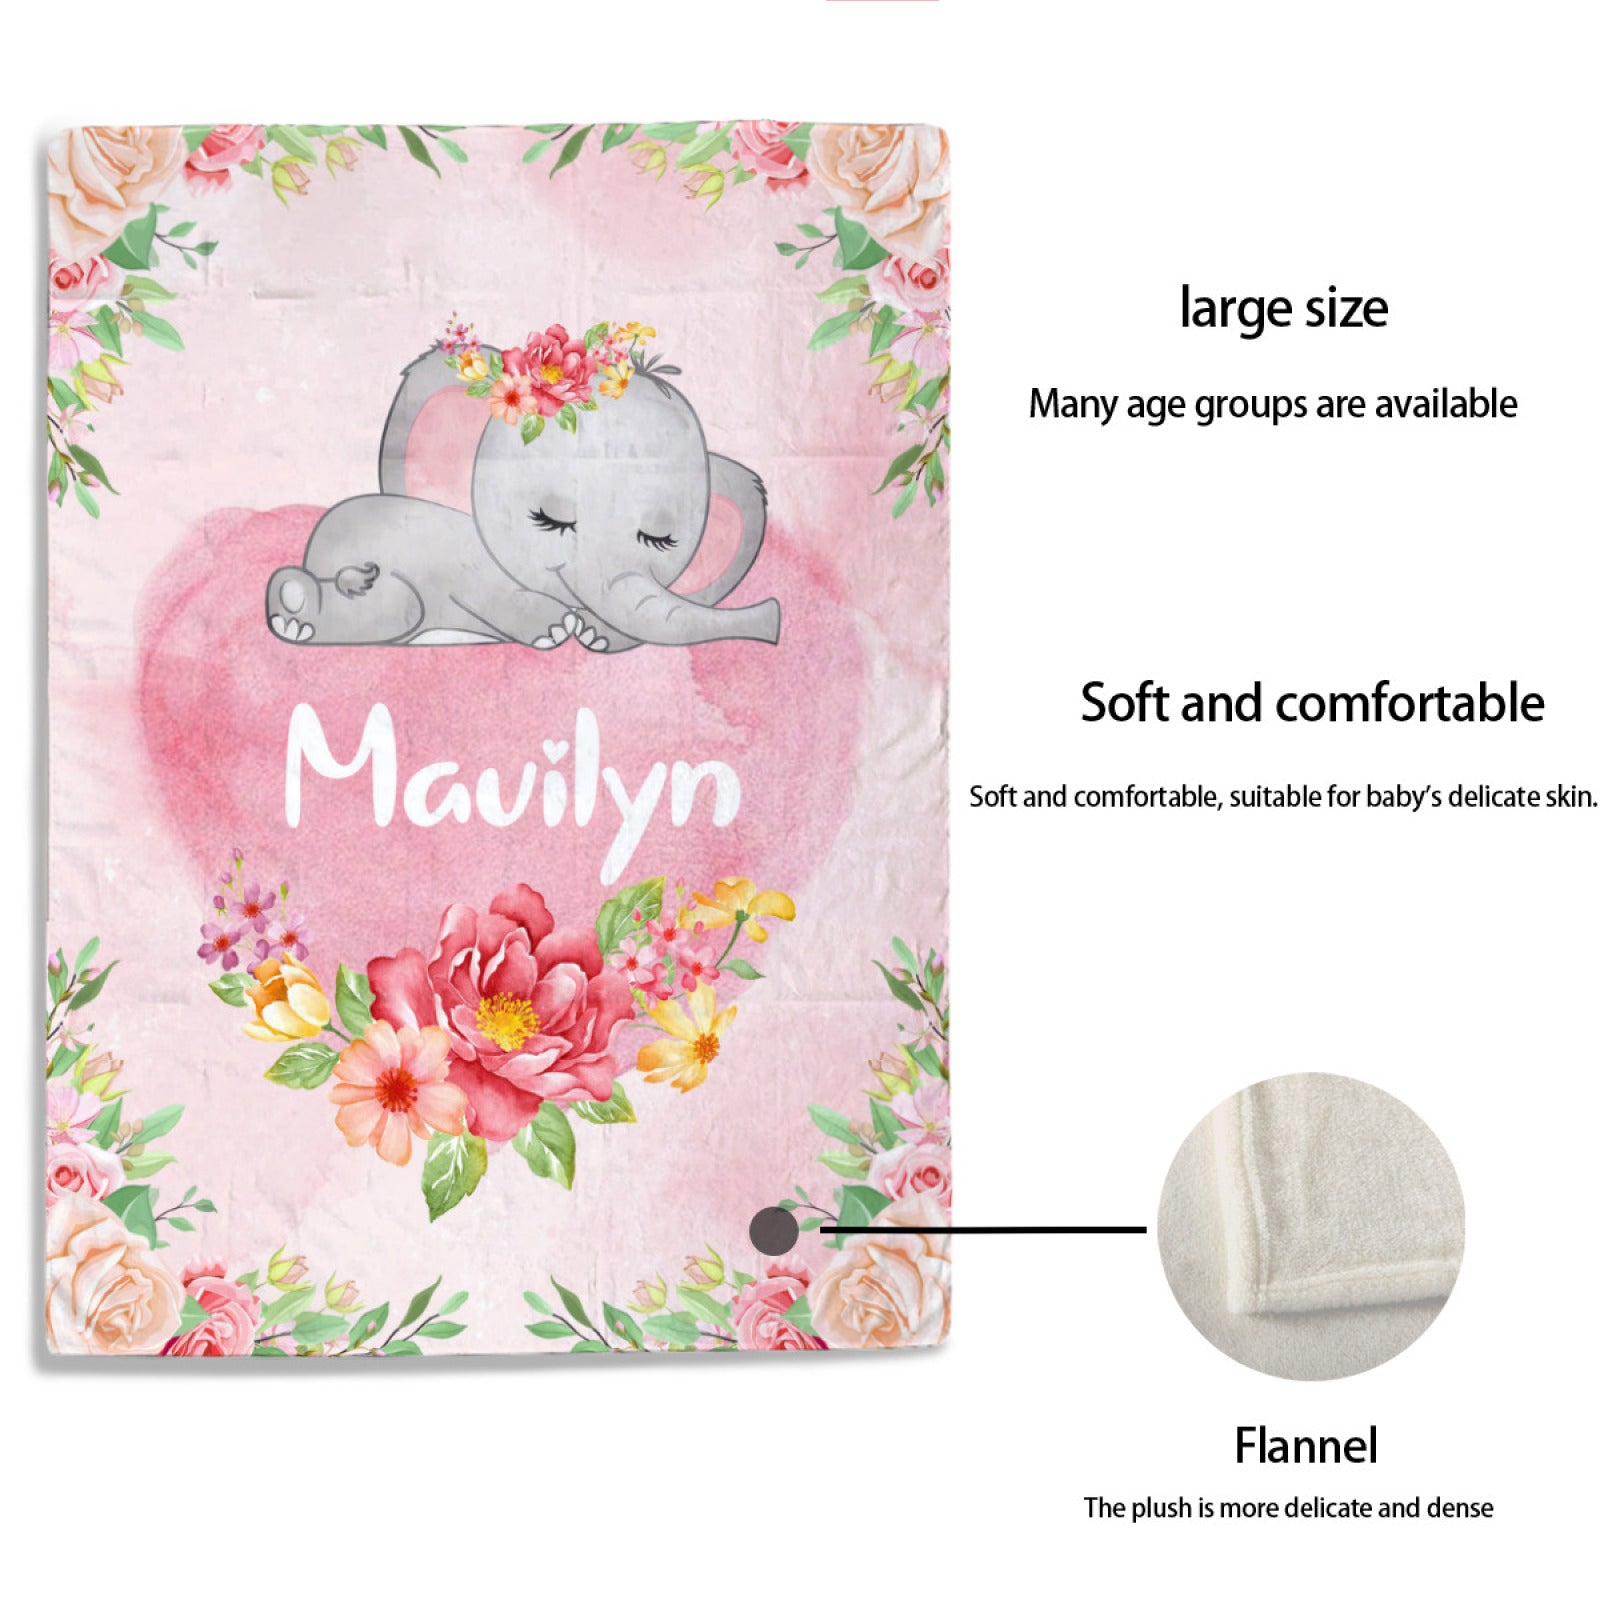 Free Shipping✈️ Customized Baby Blanket with Name, Floral Design Soft Throw Blanket, Anniversary Gift for Baby - colorfulcustom